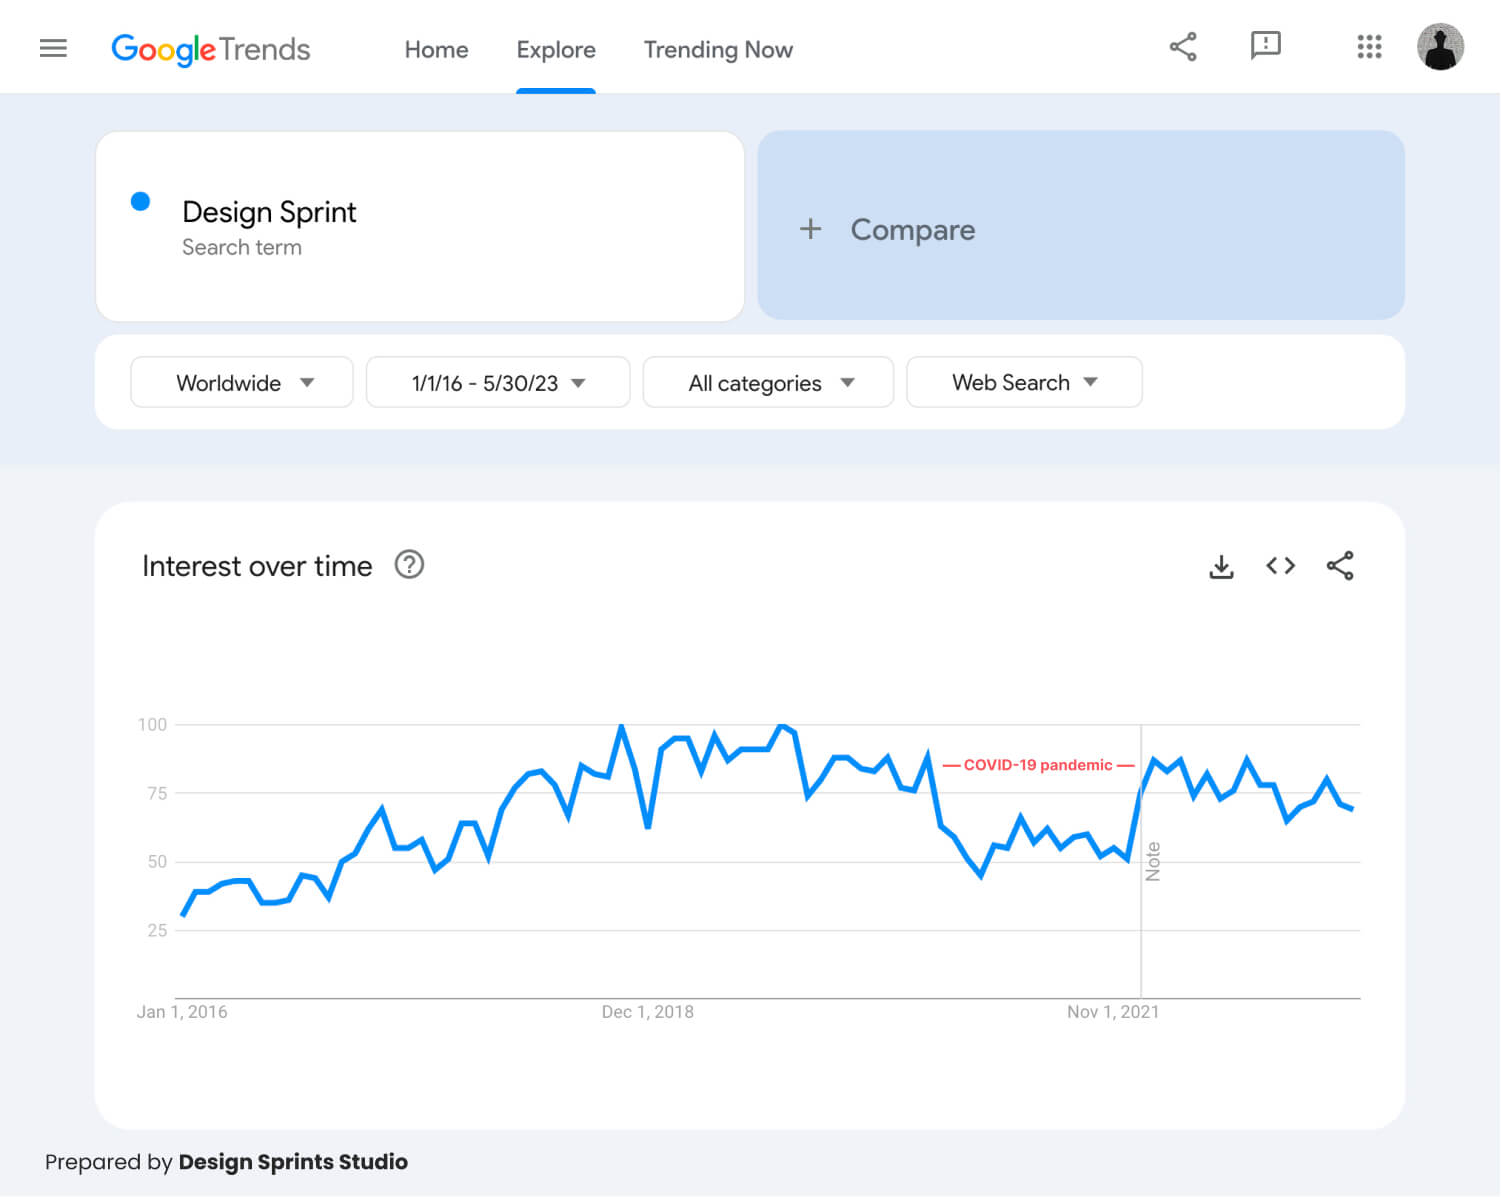 The popularity of the term Design Sprint on Google Trends